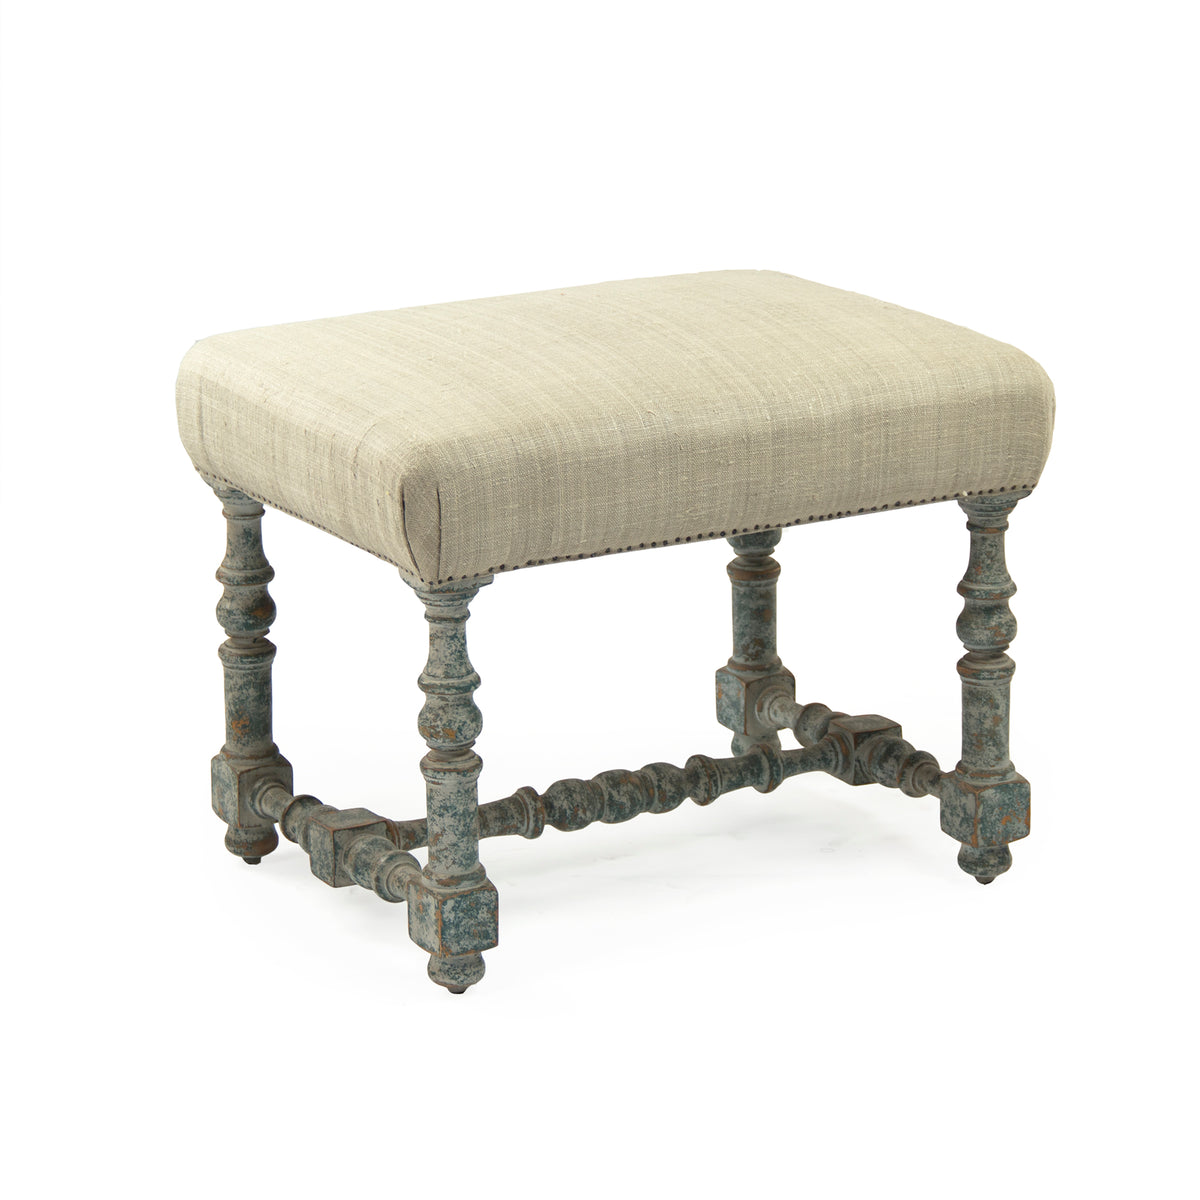 Giselle Stool by Zentique